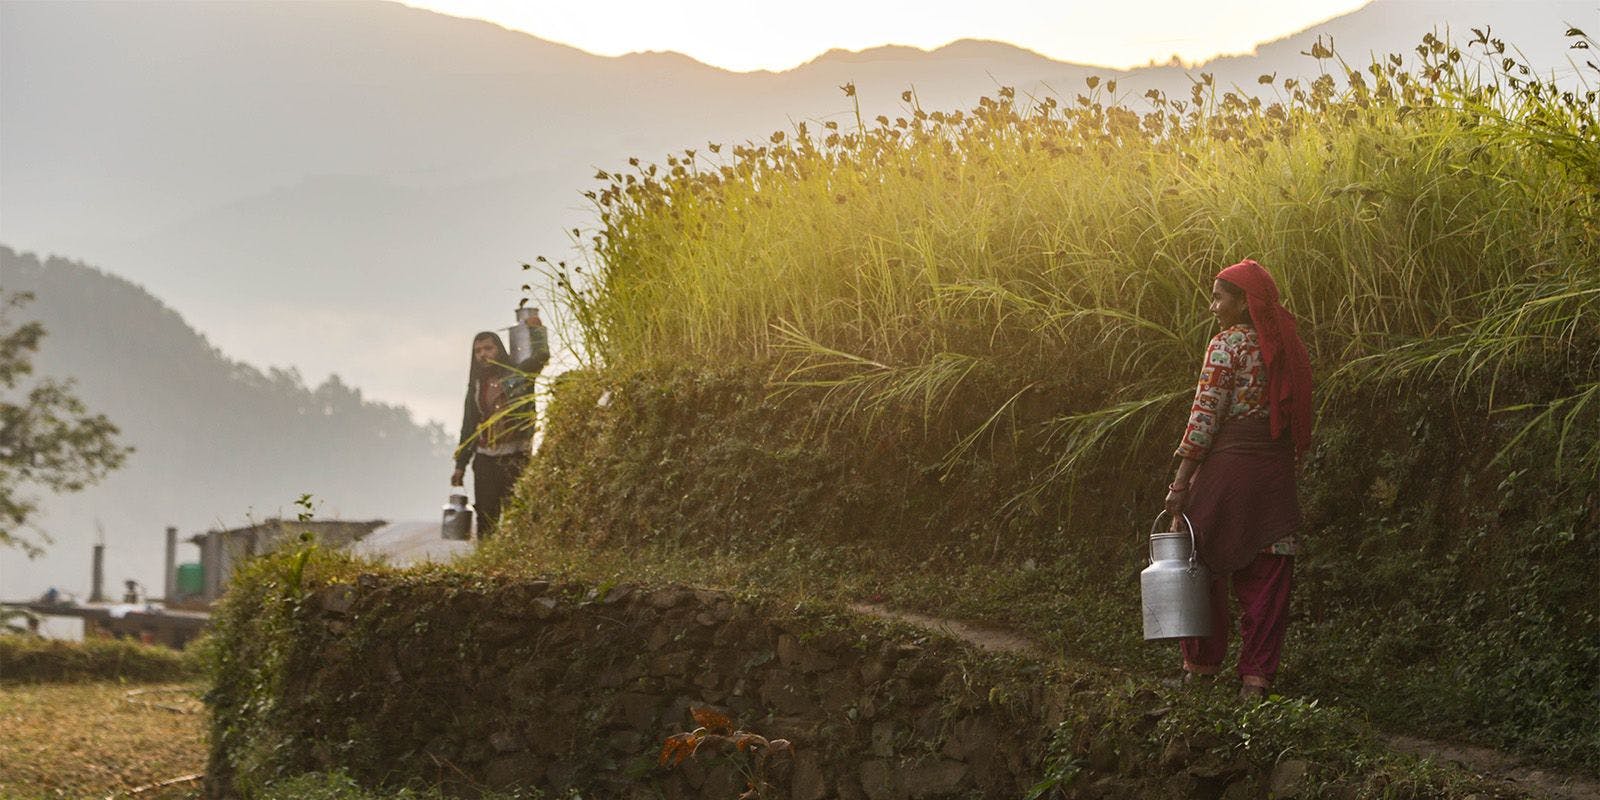 People carry milk cans in Nepal.